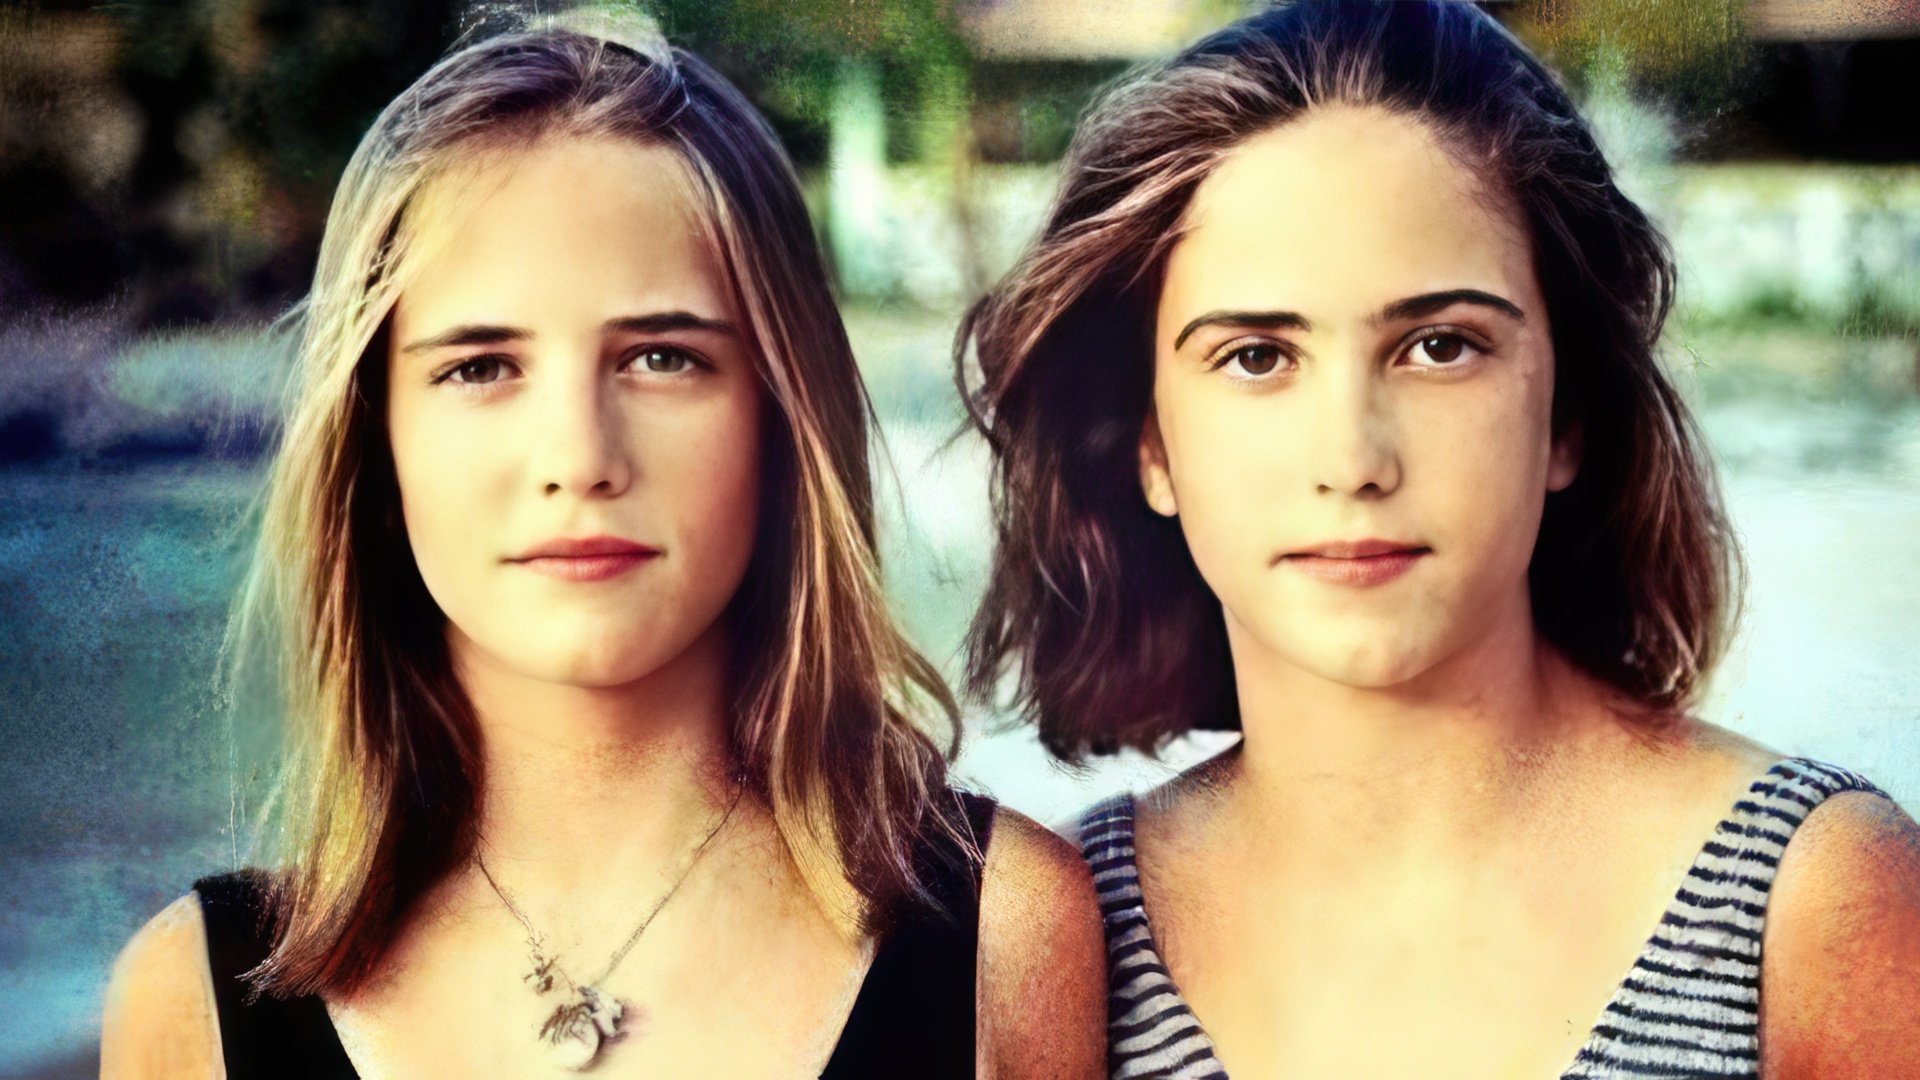 Eva Green and her twin sister in their youth